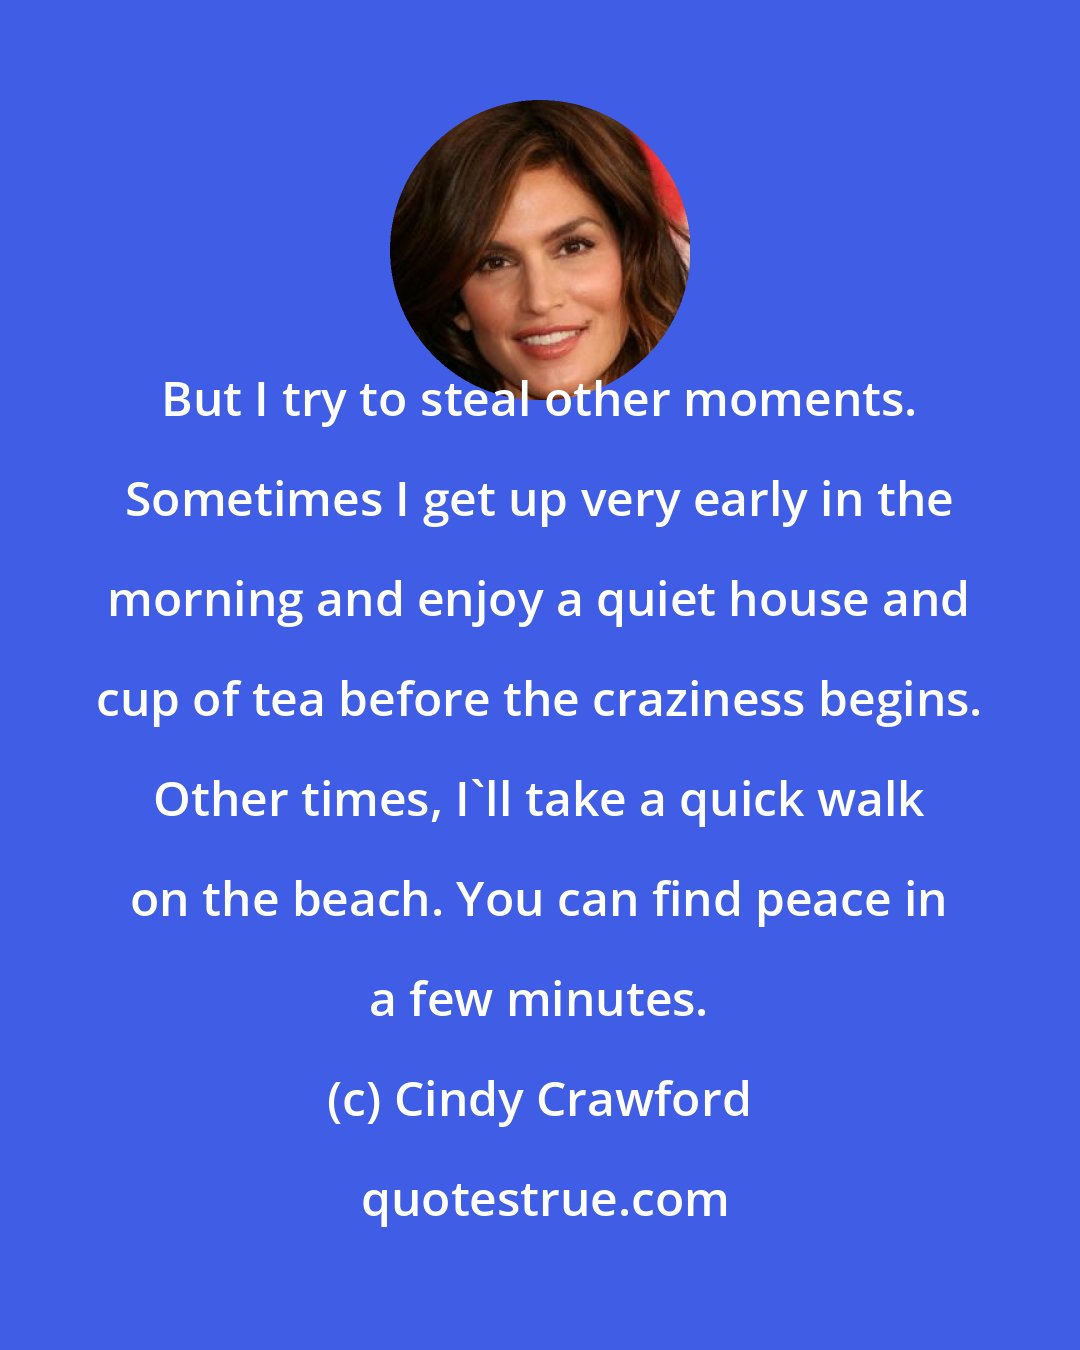 Cindy Crawford: But I try to steal other moments. Sometimes I get up very early in the morning and enjoy a quiet house and cup of tea before the craziness begins. Other times, I'll take a quick walk on the beach. You can find peace in a few minutes.